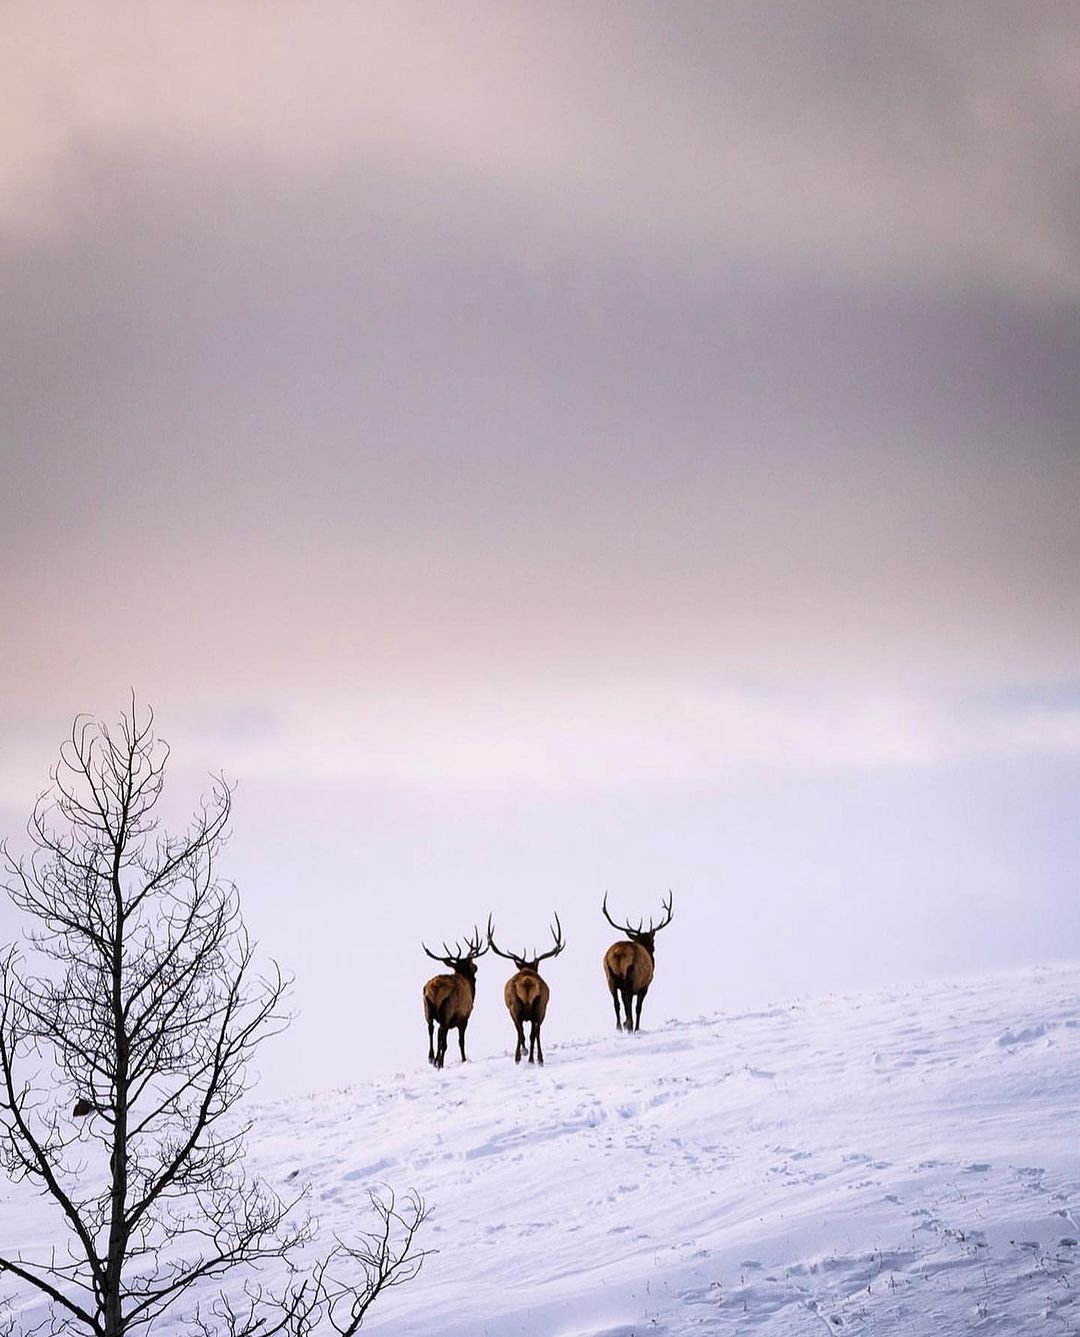 @stevendrakephoto with “So long winter”! 🦌 ❄️ 🏔️ The migrations get underwa...